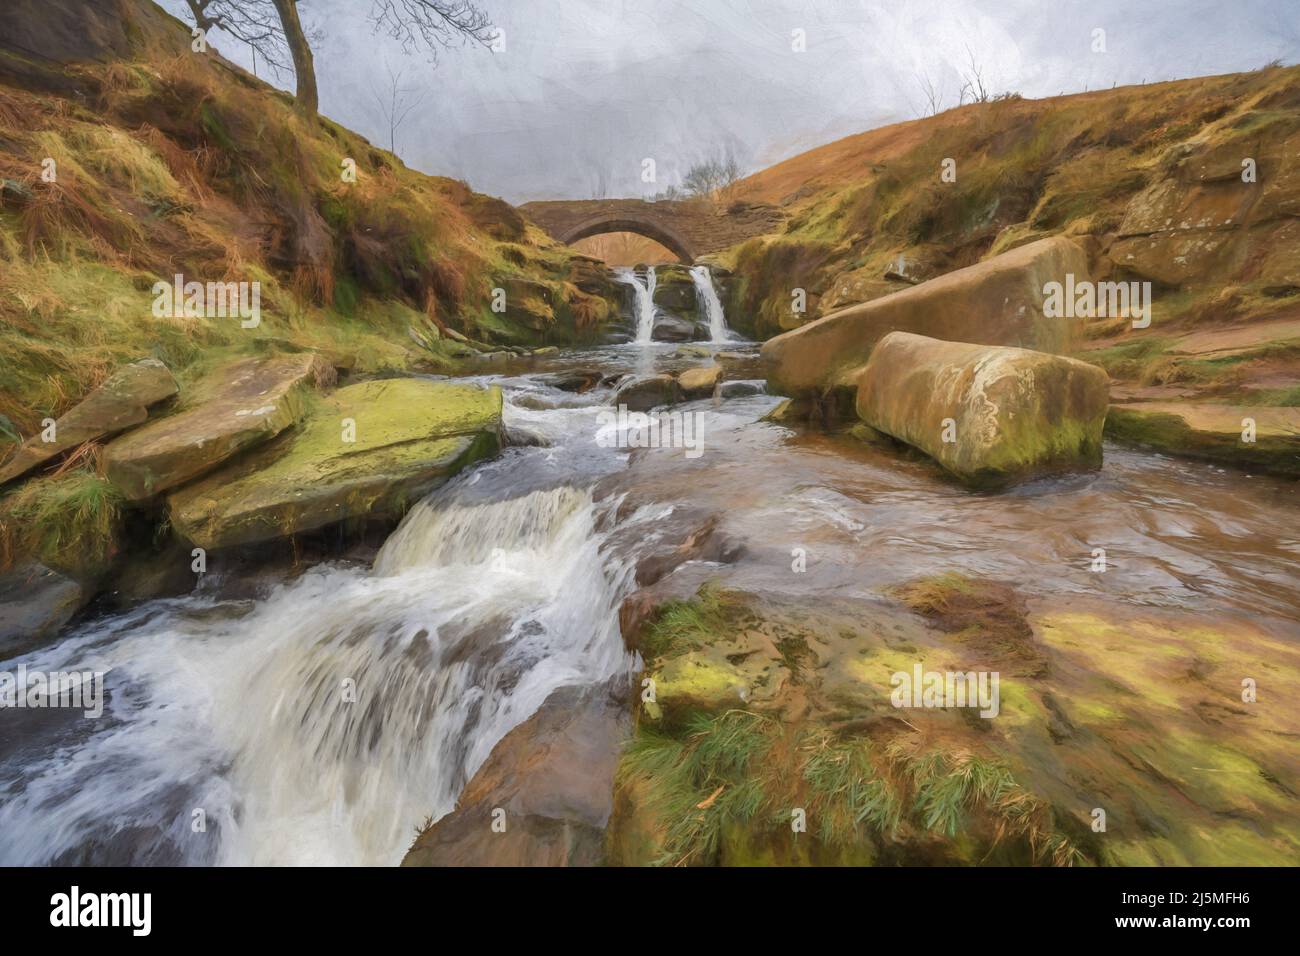 Fine art poster. Digital abstract oil painting of Three Shire Heads. A stone packhorse bridge in the Peak District National Park. Stock Photo